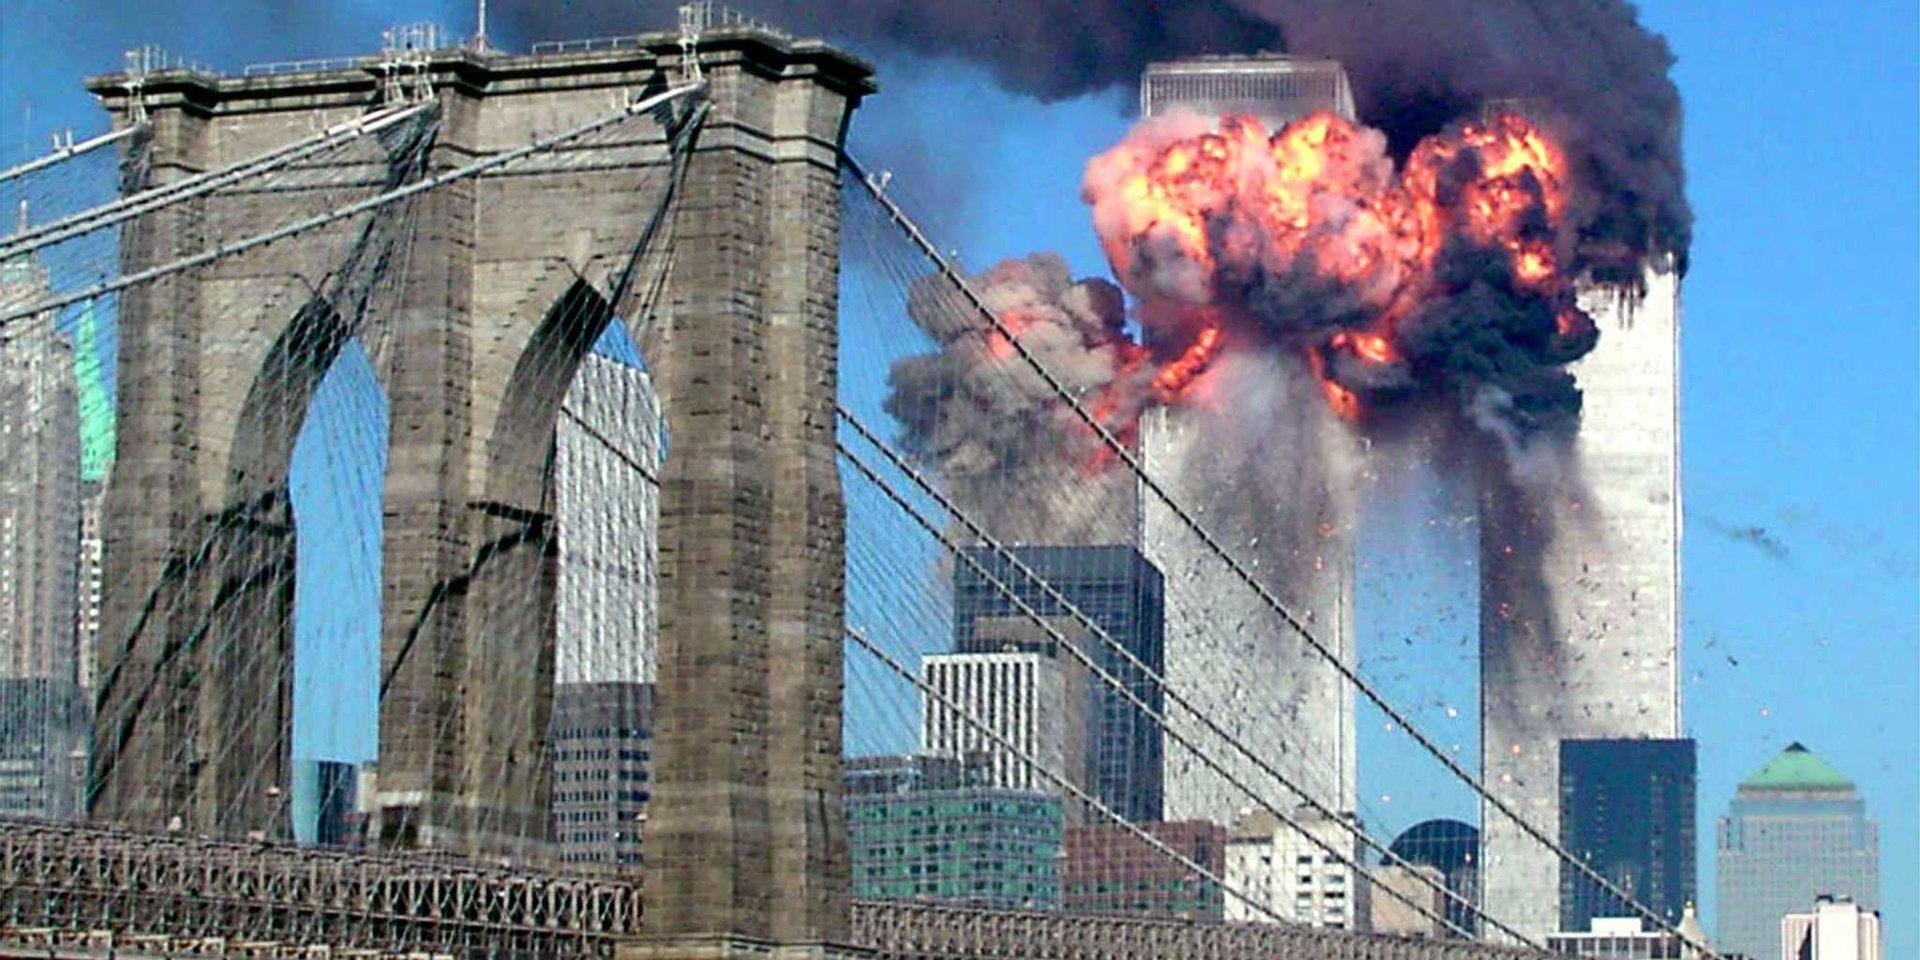 haunting photo from the September 11 attacks that